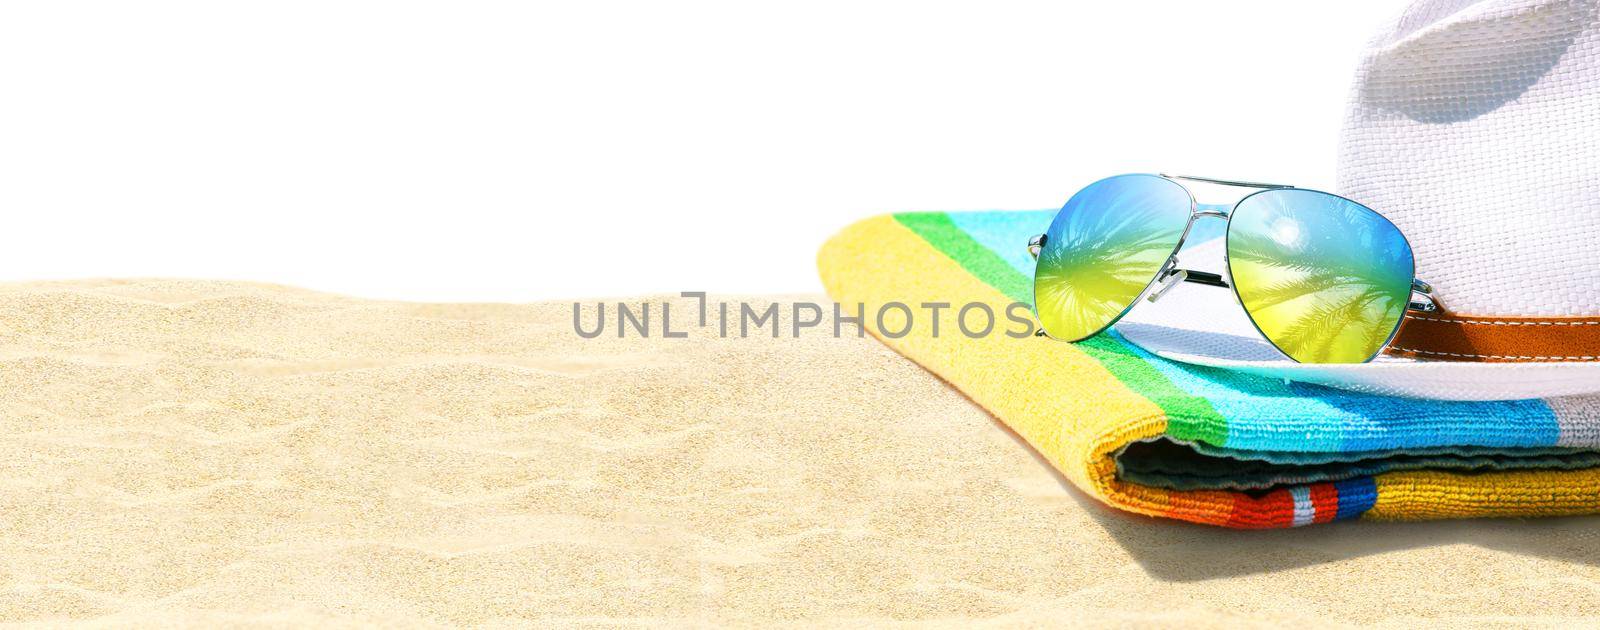 Summer tropical beach background with sunglasses and hat. by Taut